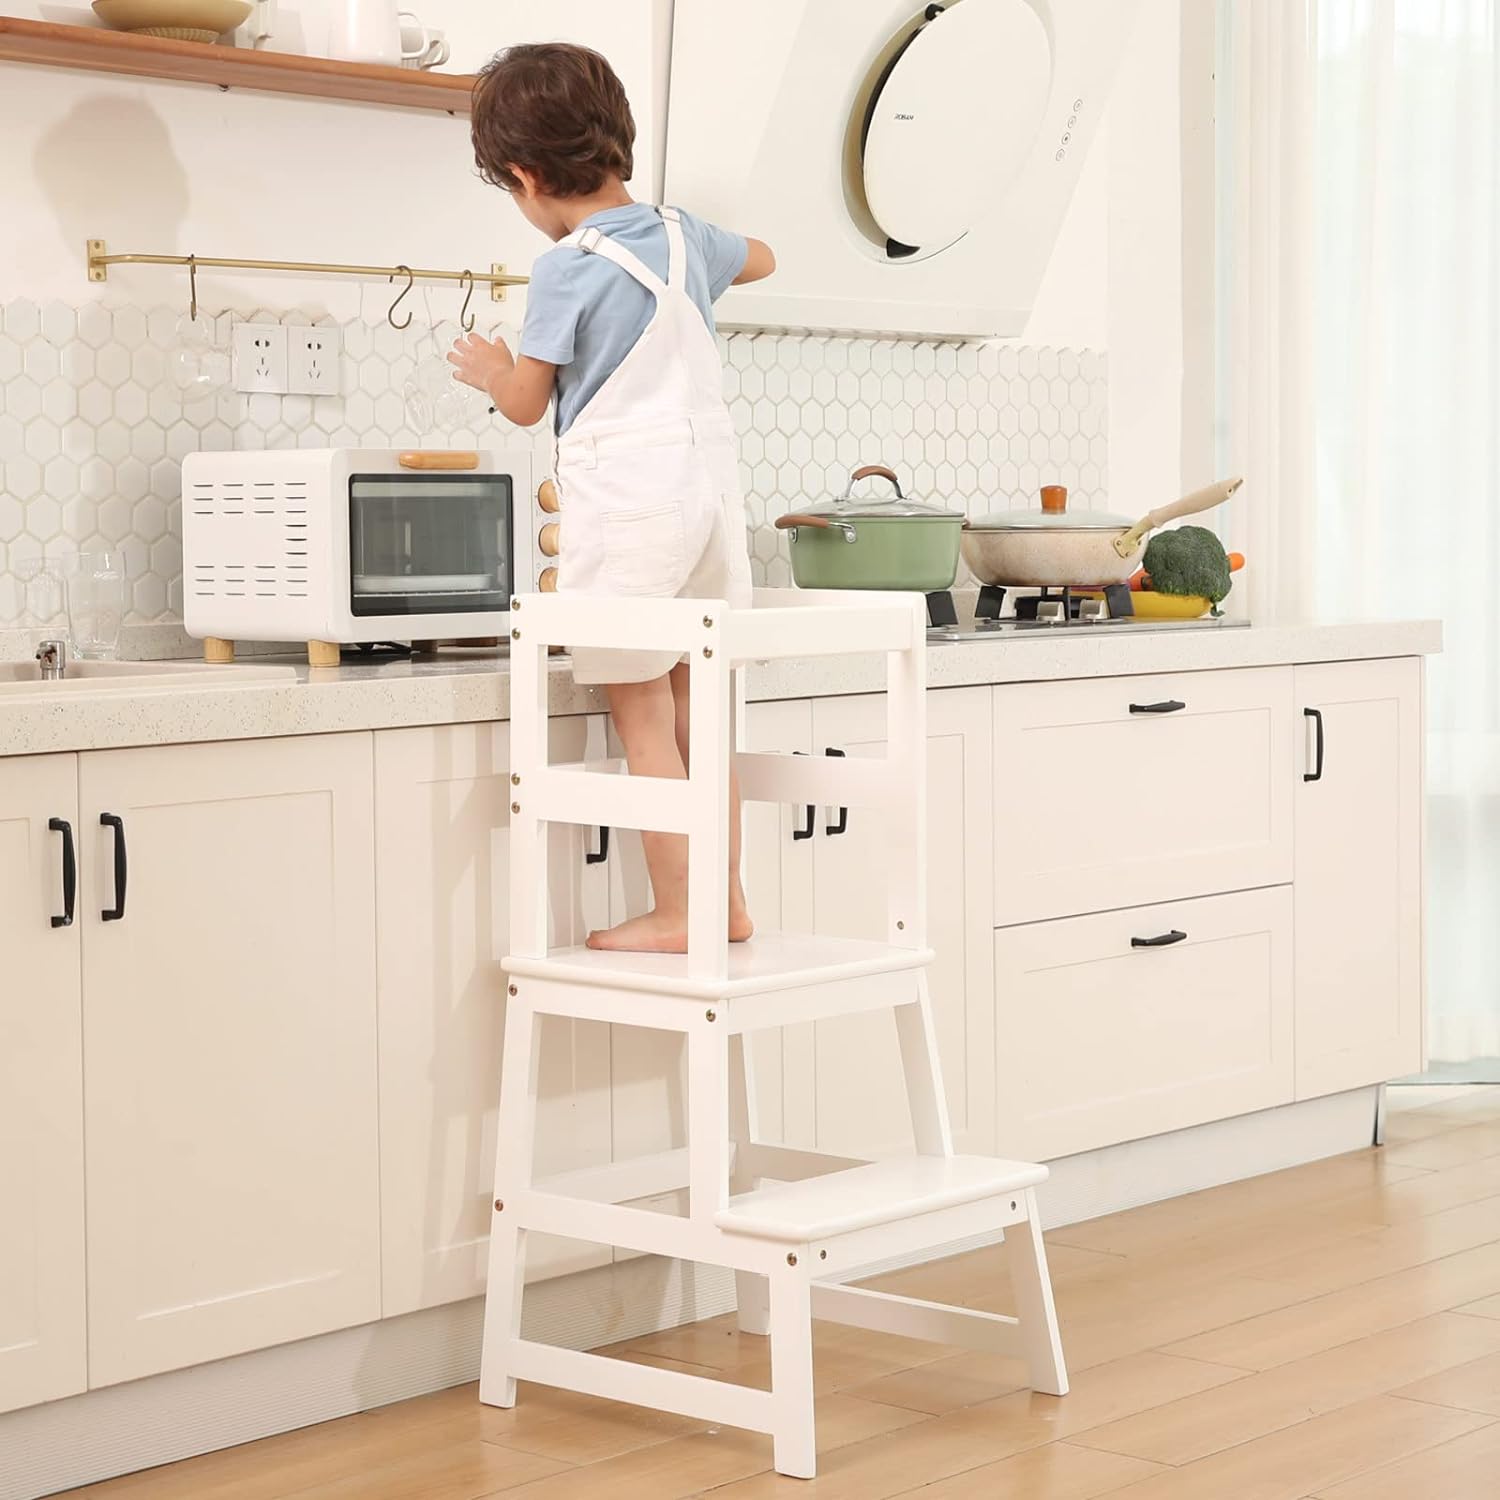 learning tower Kitchen Step Stool for Kids with Safety Rail,